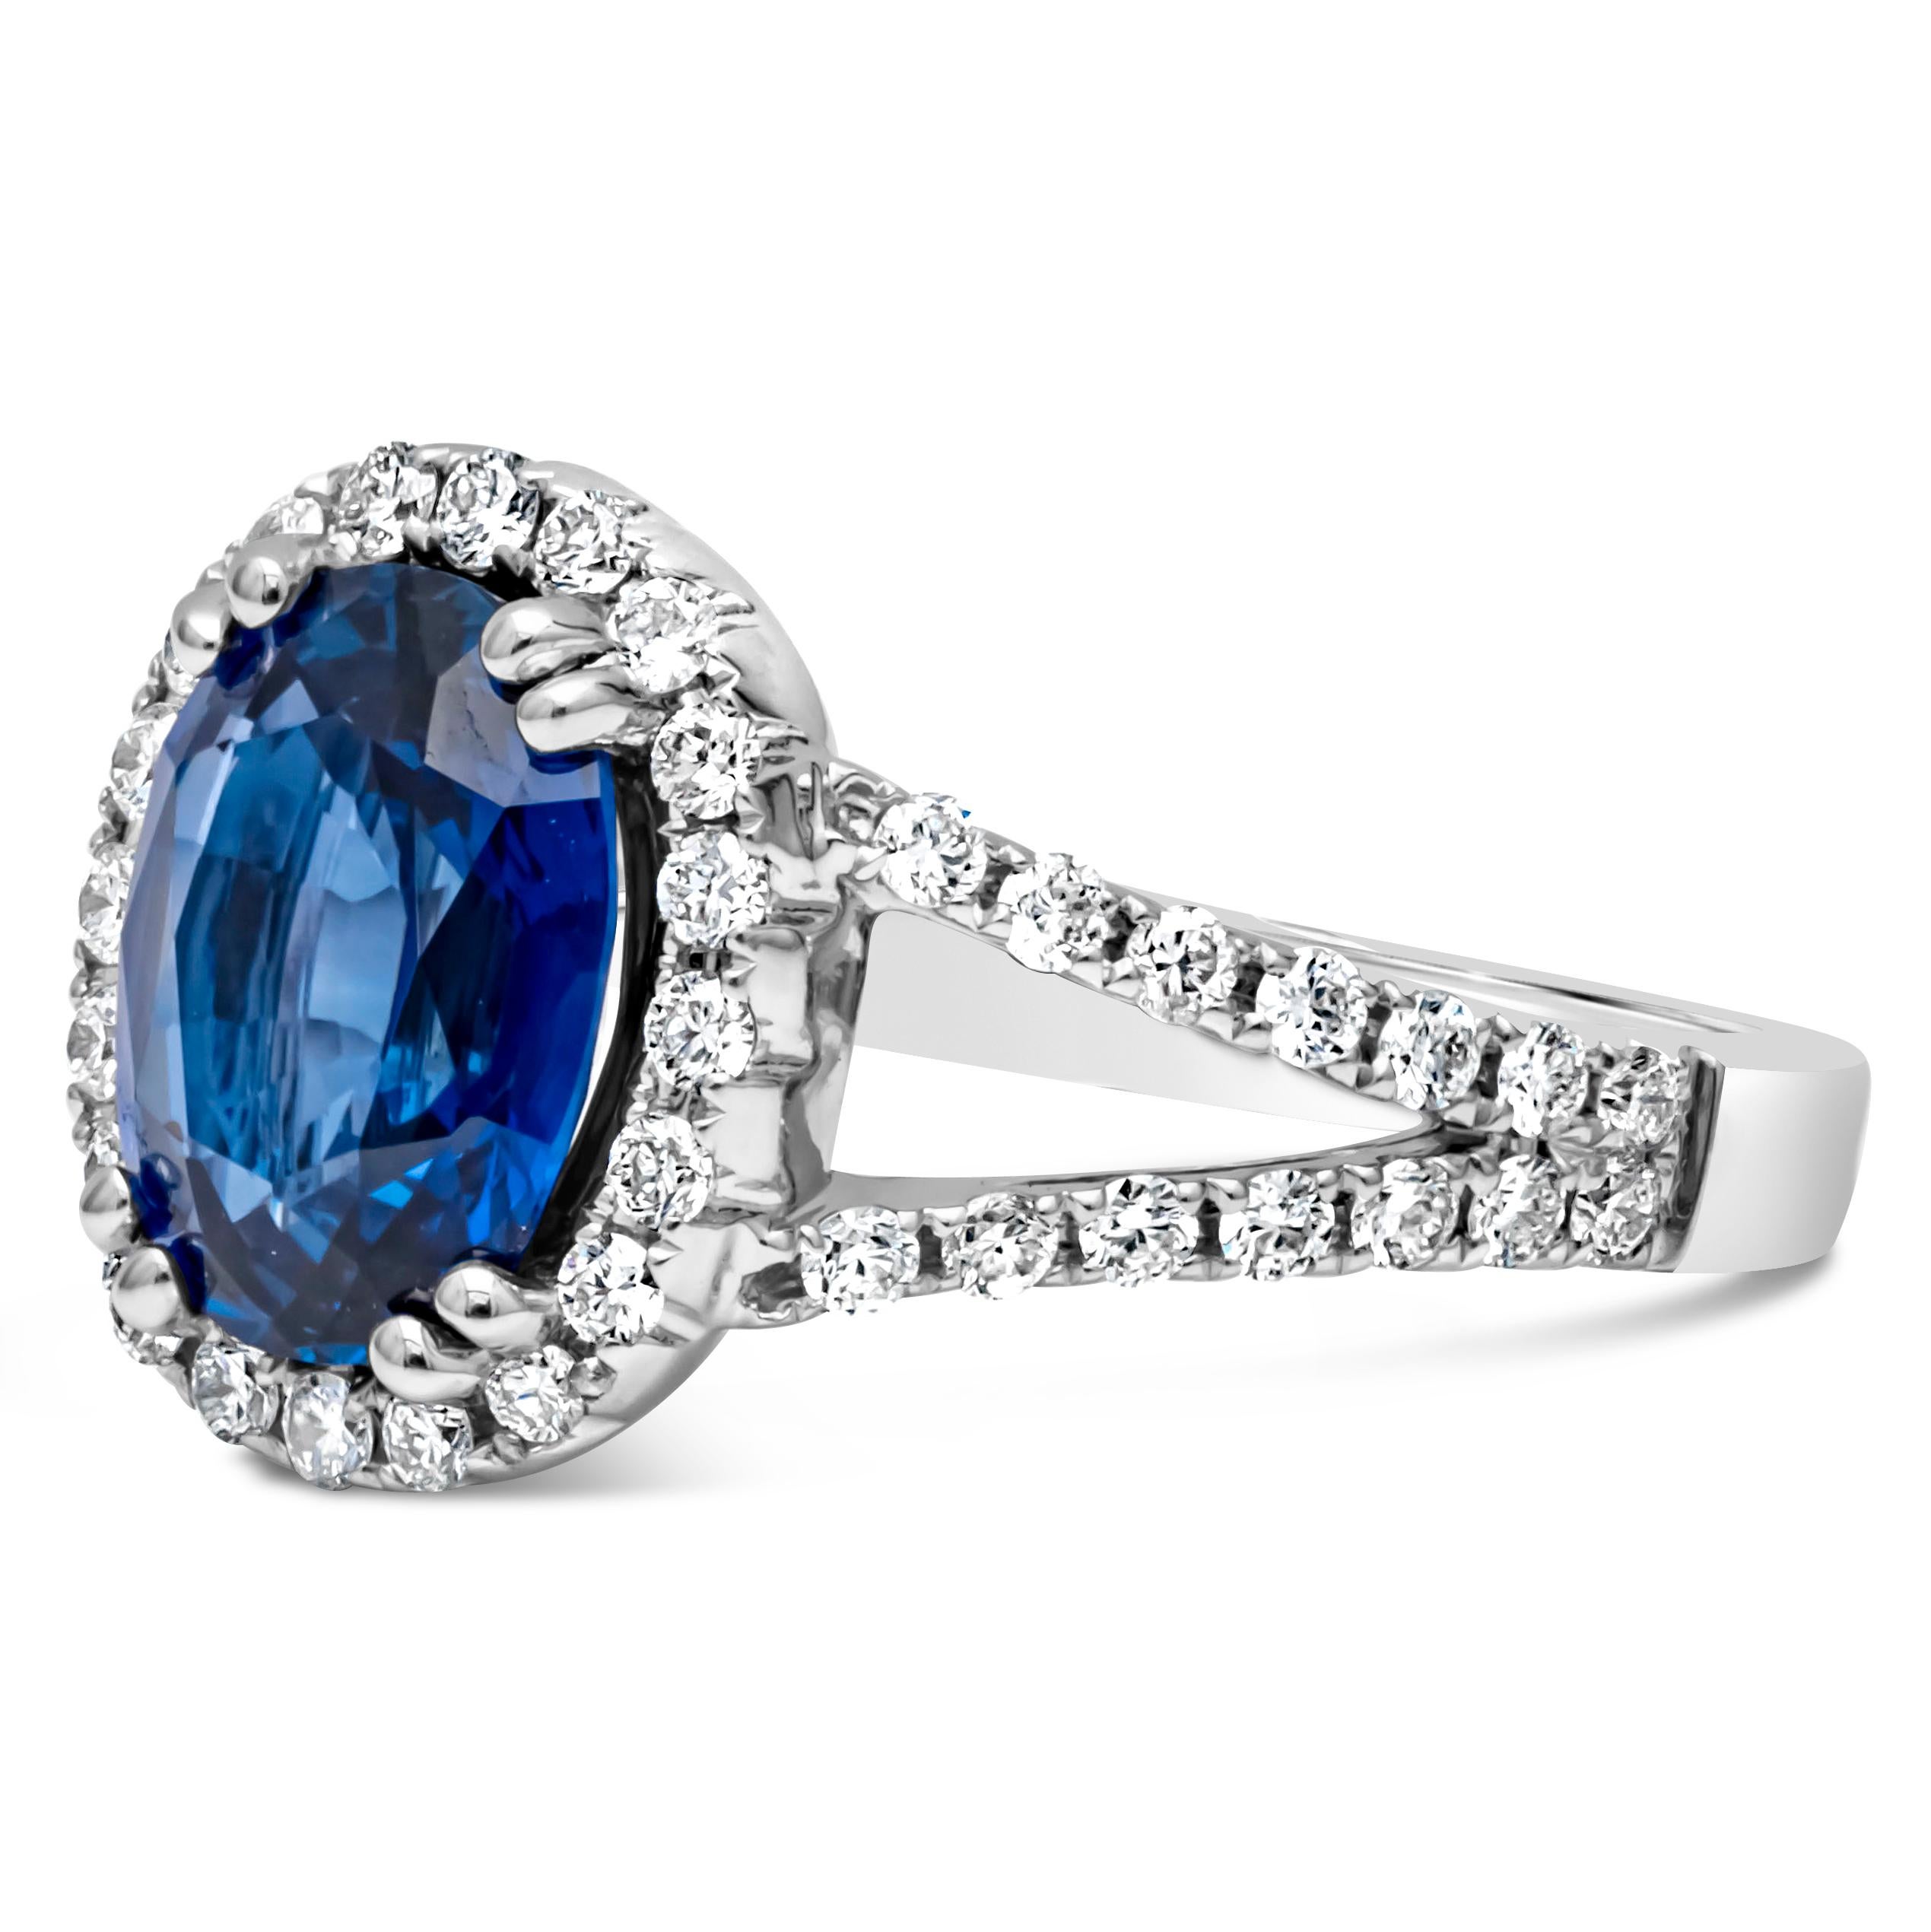 This elegant and stunning halo engagement ring features a GIA certified oval cut natural heated Sri-Lanka blue sapphire weighing 2.68 carats total, set in a timeless eight prong basket setting. Surrounded by a single row of brilliant round diamonds